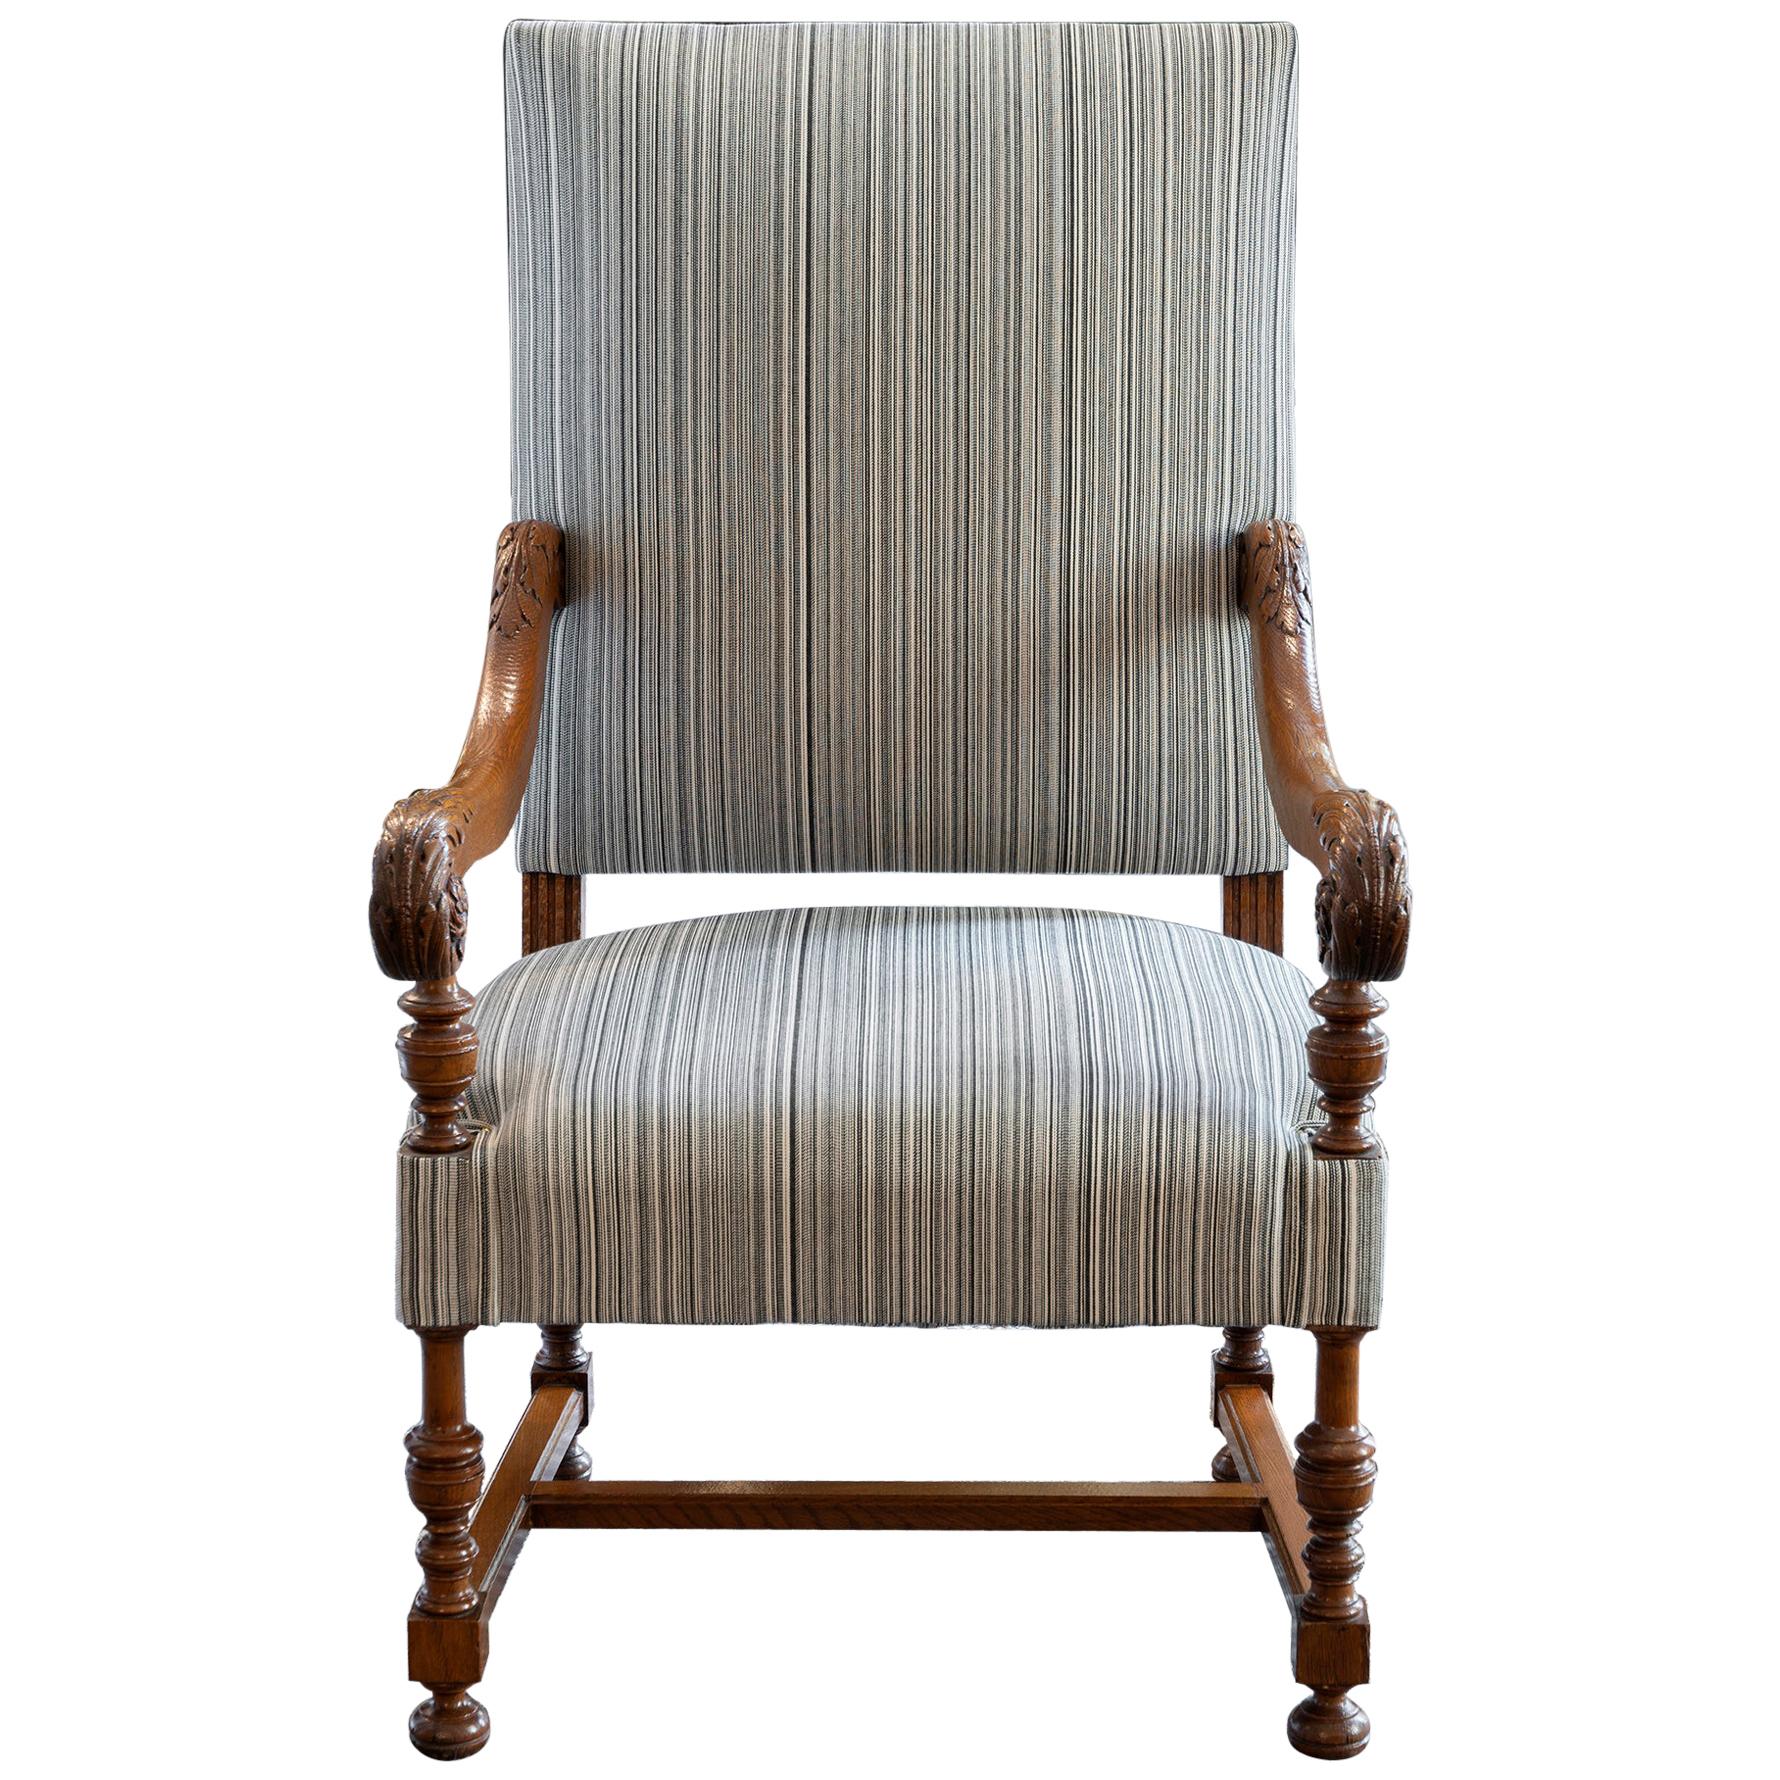 Late 19th Century French Walnut Armchair Black and White Stripes Fabric